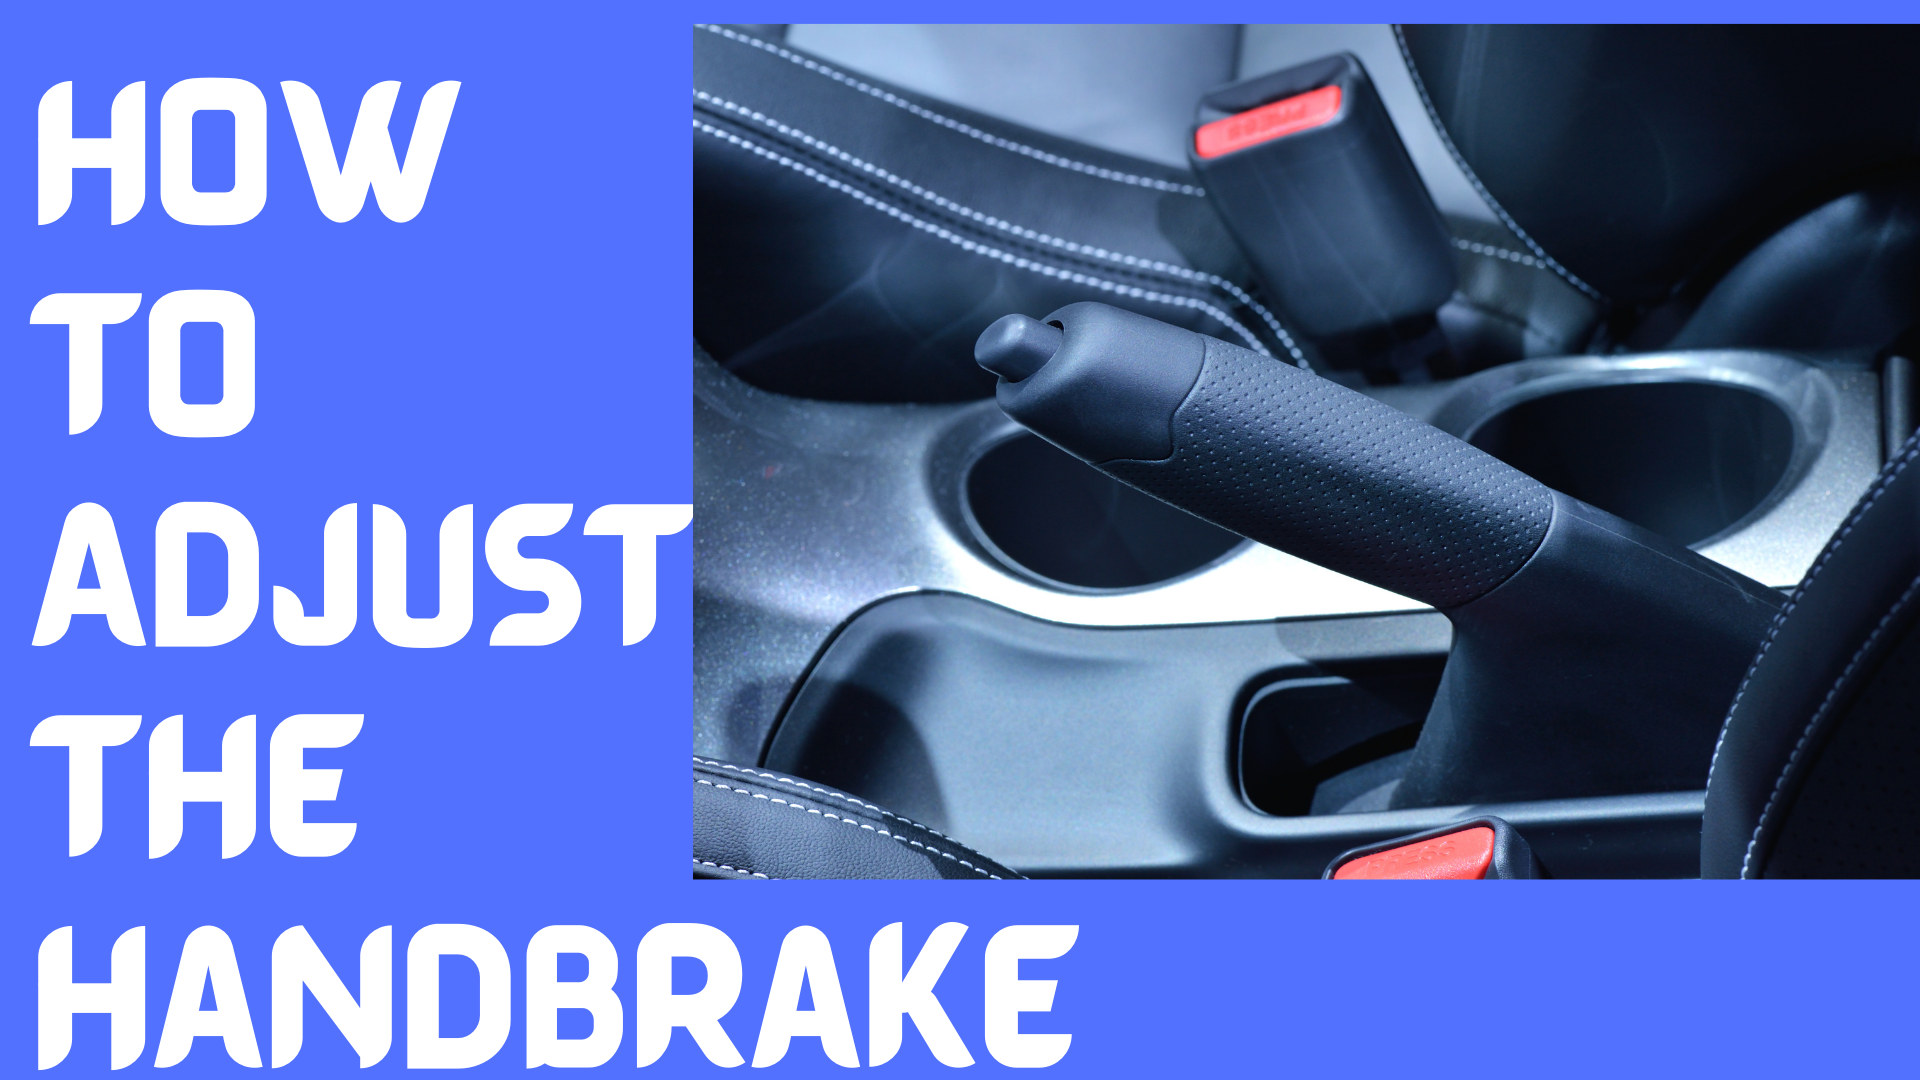 How Do You Adjust A Handbrake In a Truck Easily